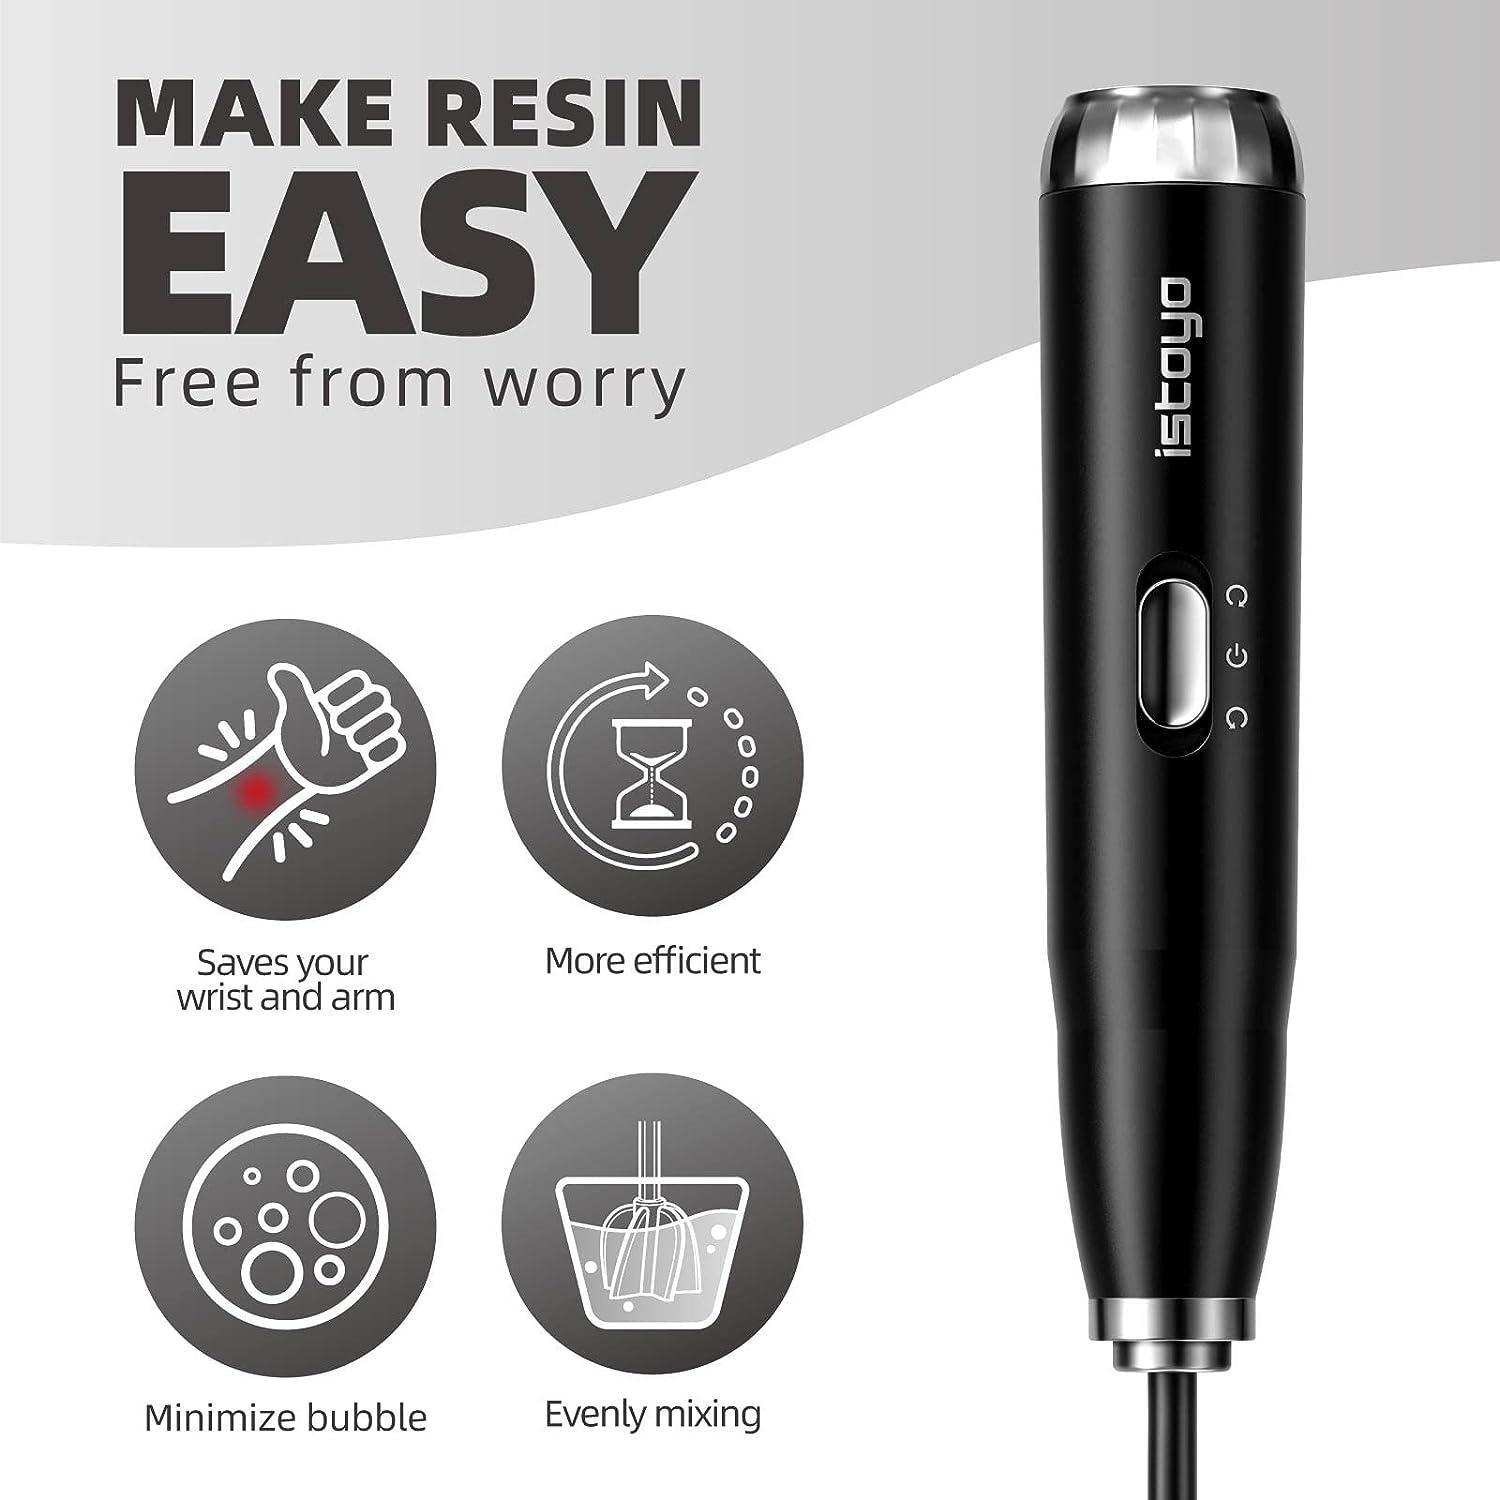 Resin Mixer Electric For Epoxy Handheld Battery Epoxy Mixer For Minimizing  Bubbles Epoxy Resin Mixer With